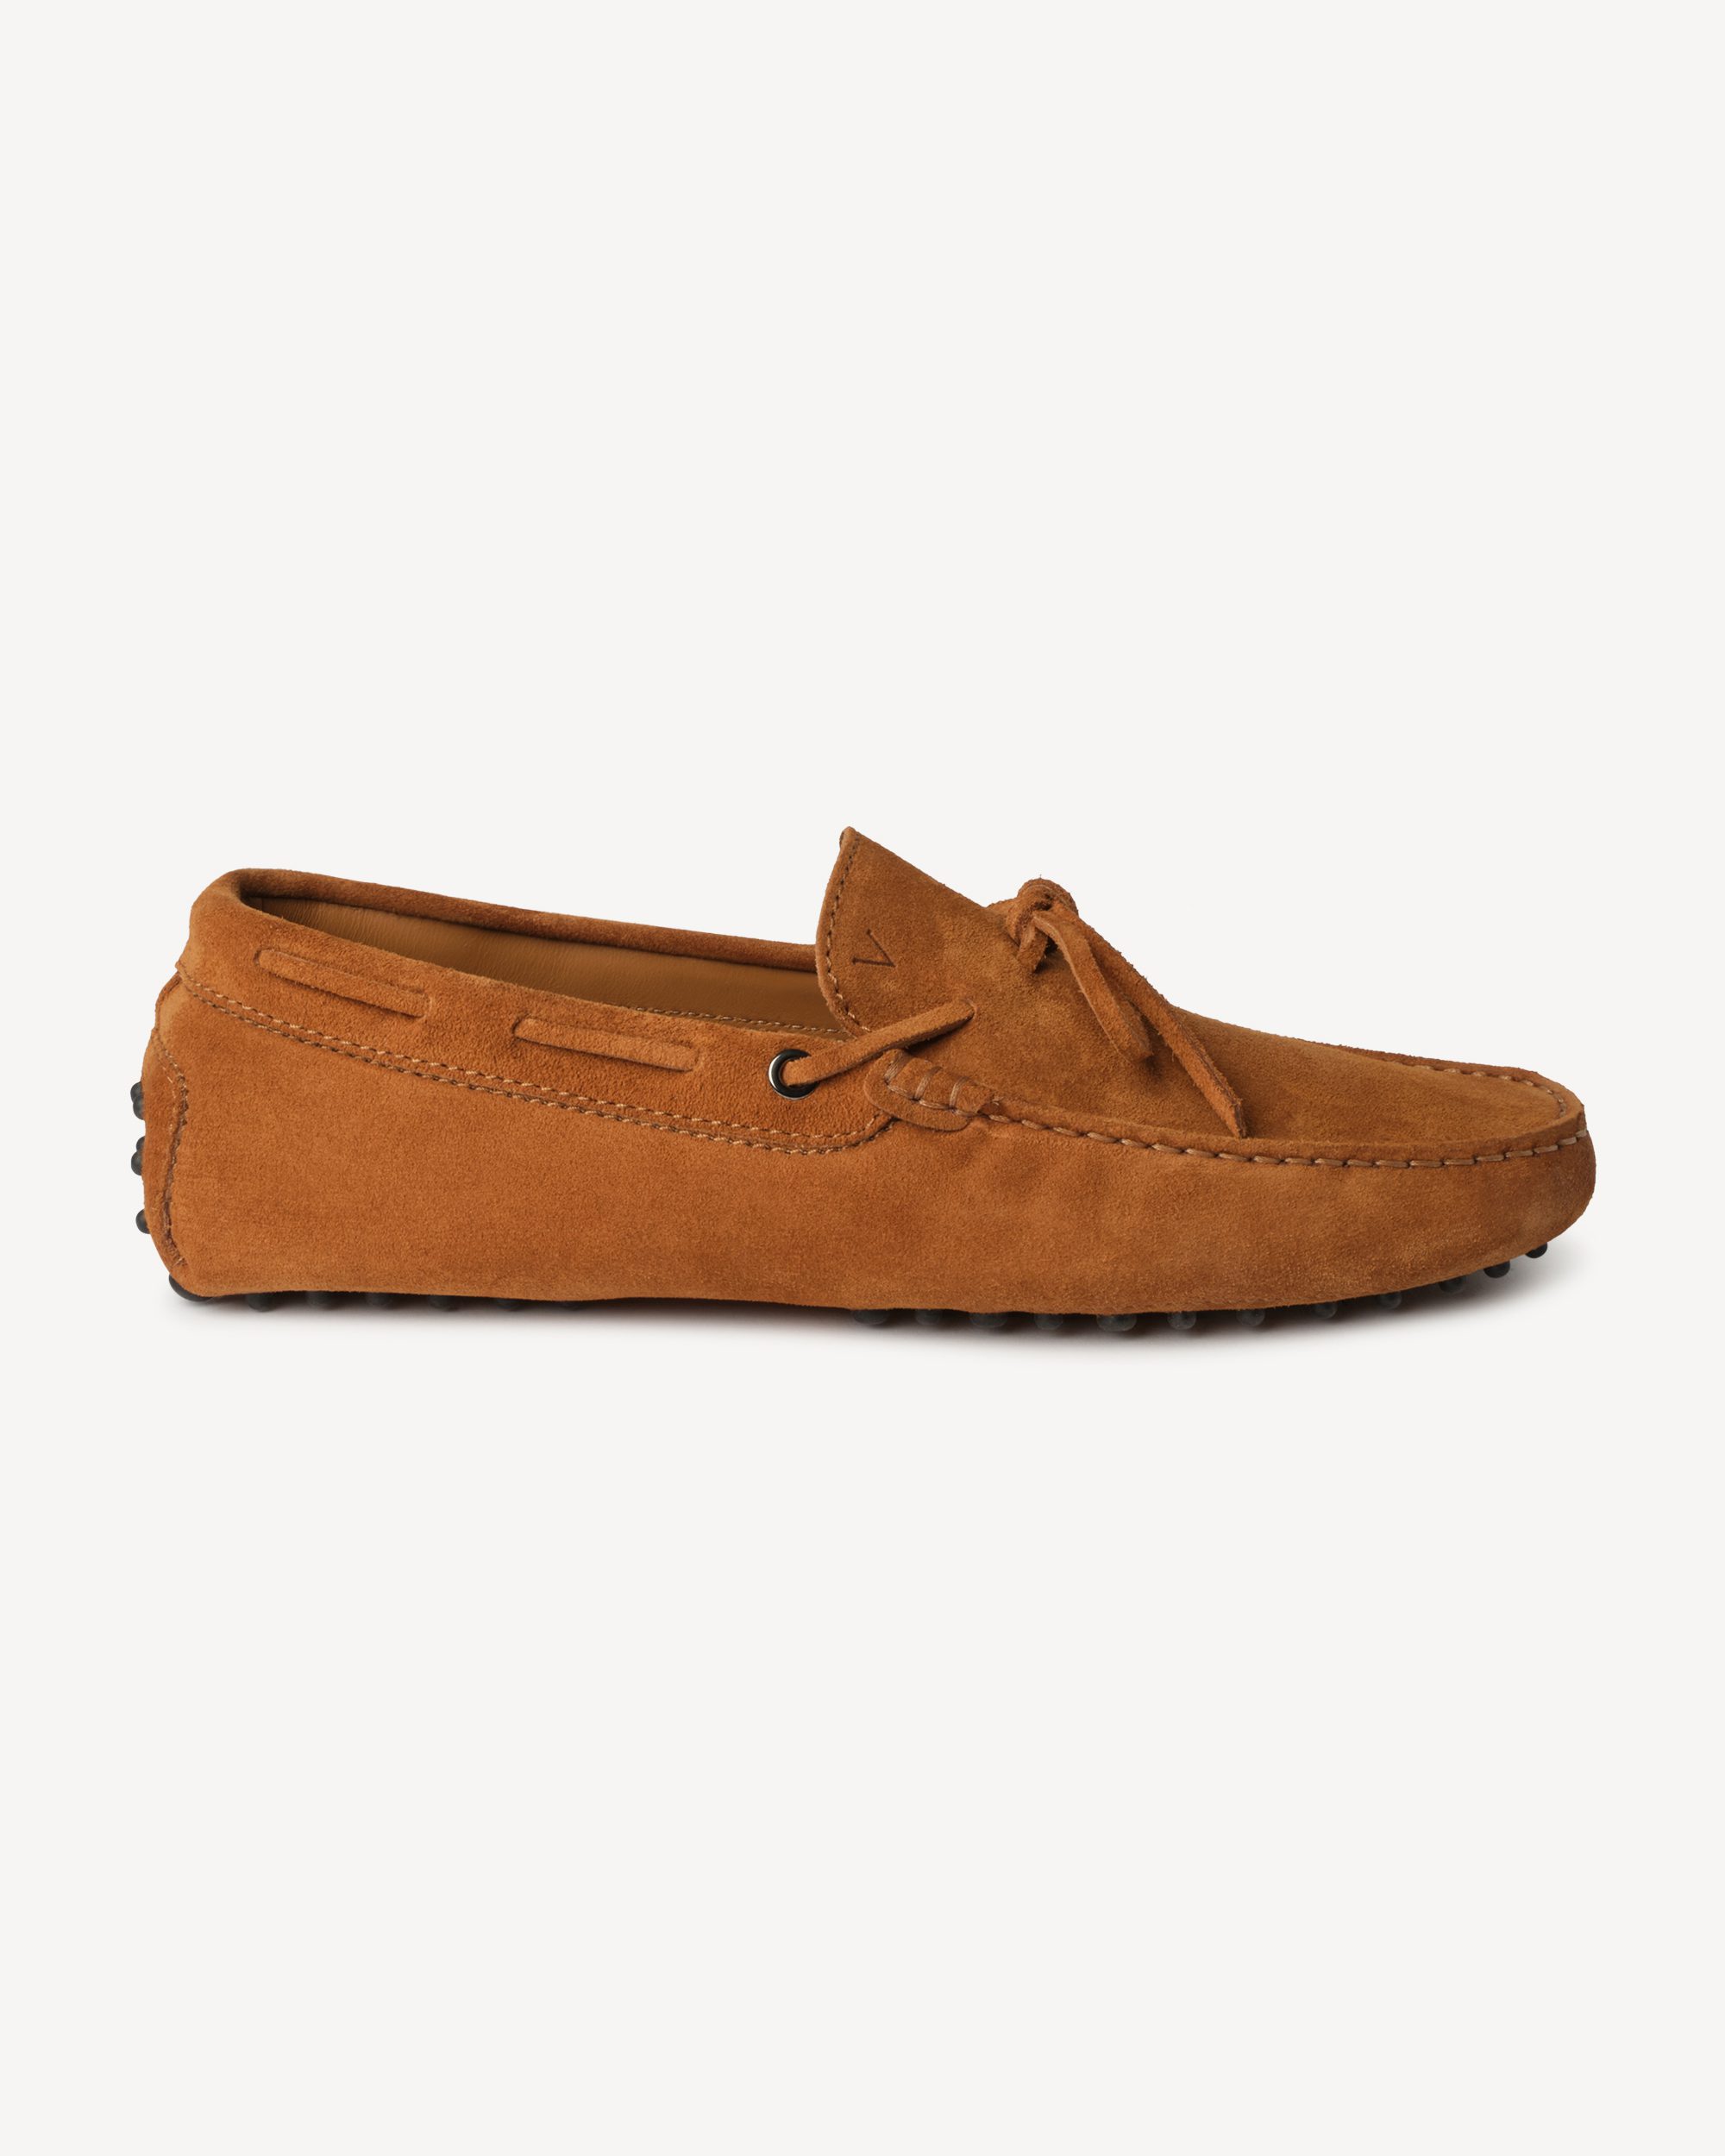 Gommino Suede driving Loafer - Cola | Viola Milano